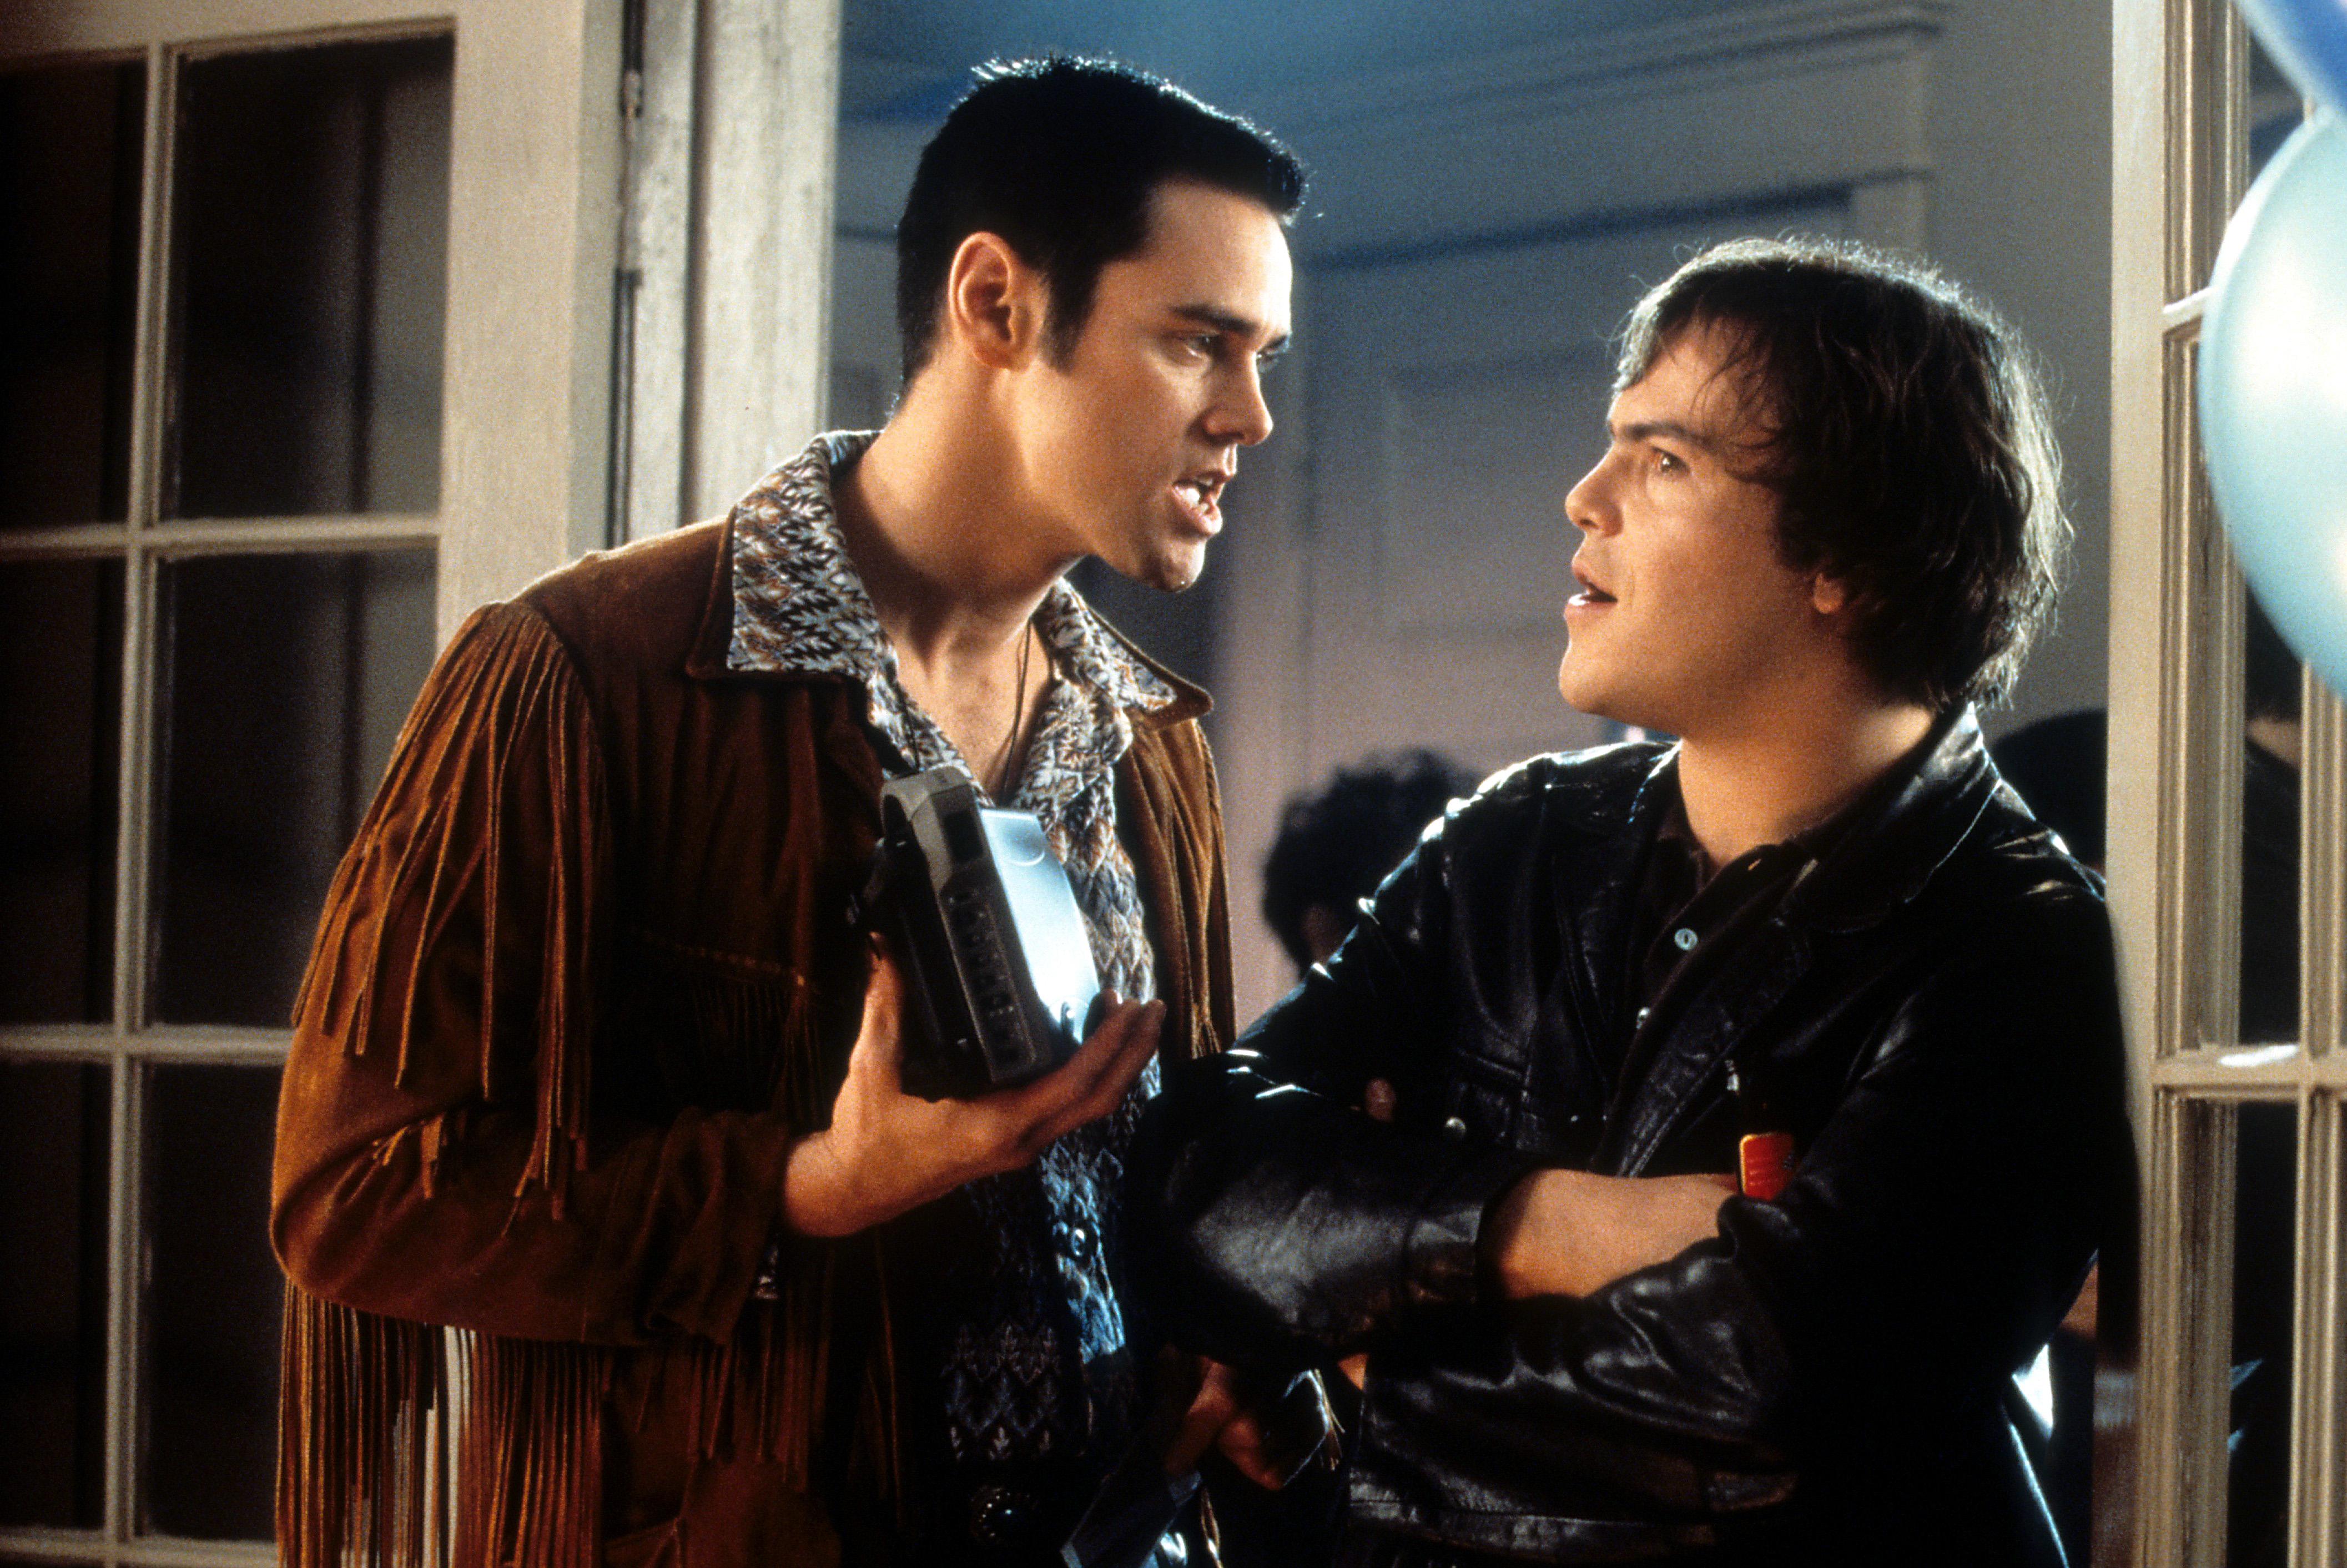 Jim Carrey and Jack Black in a scene from the film 'The Cable Guy', 1996. 